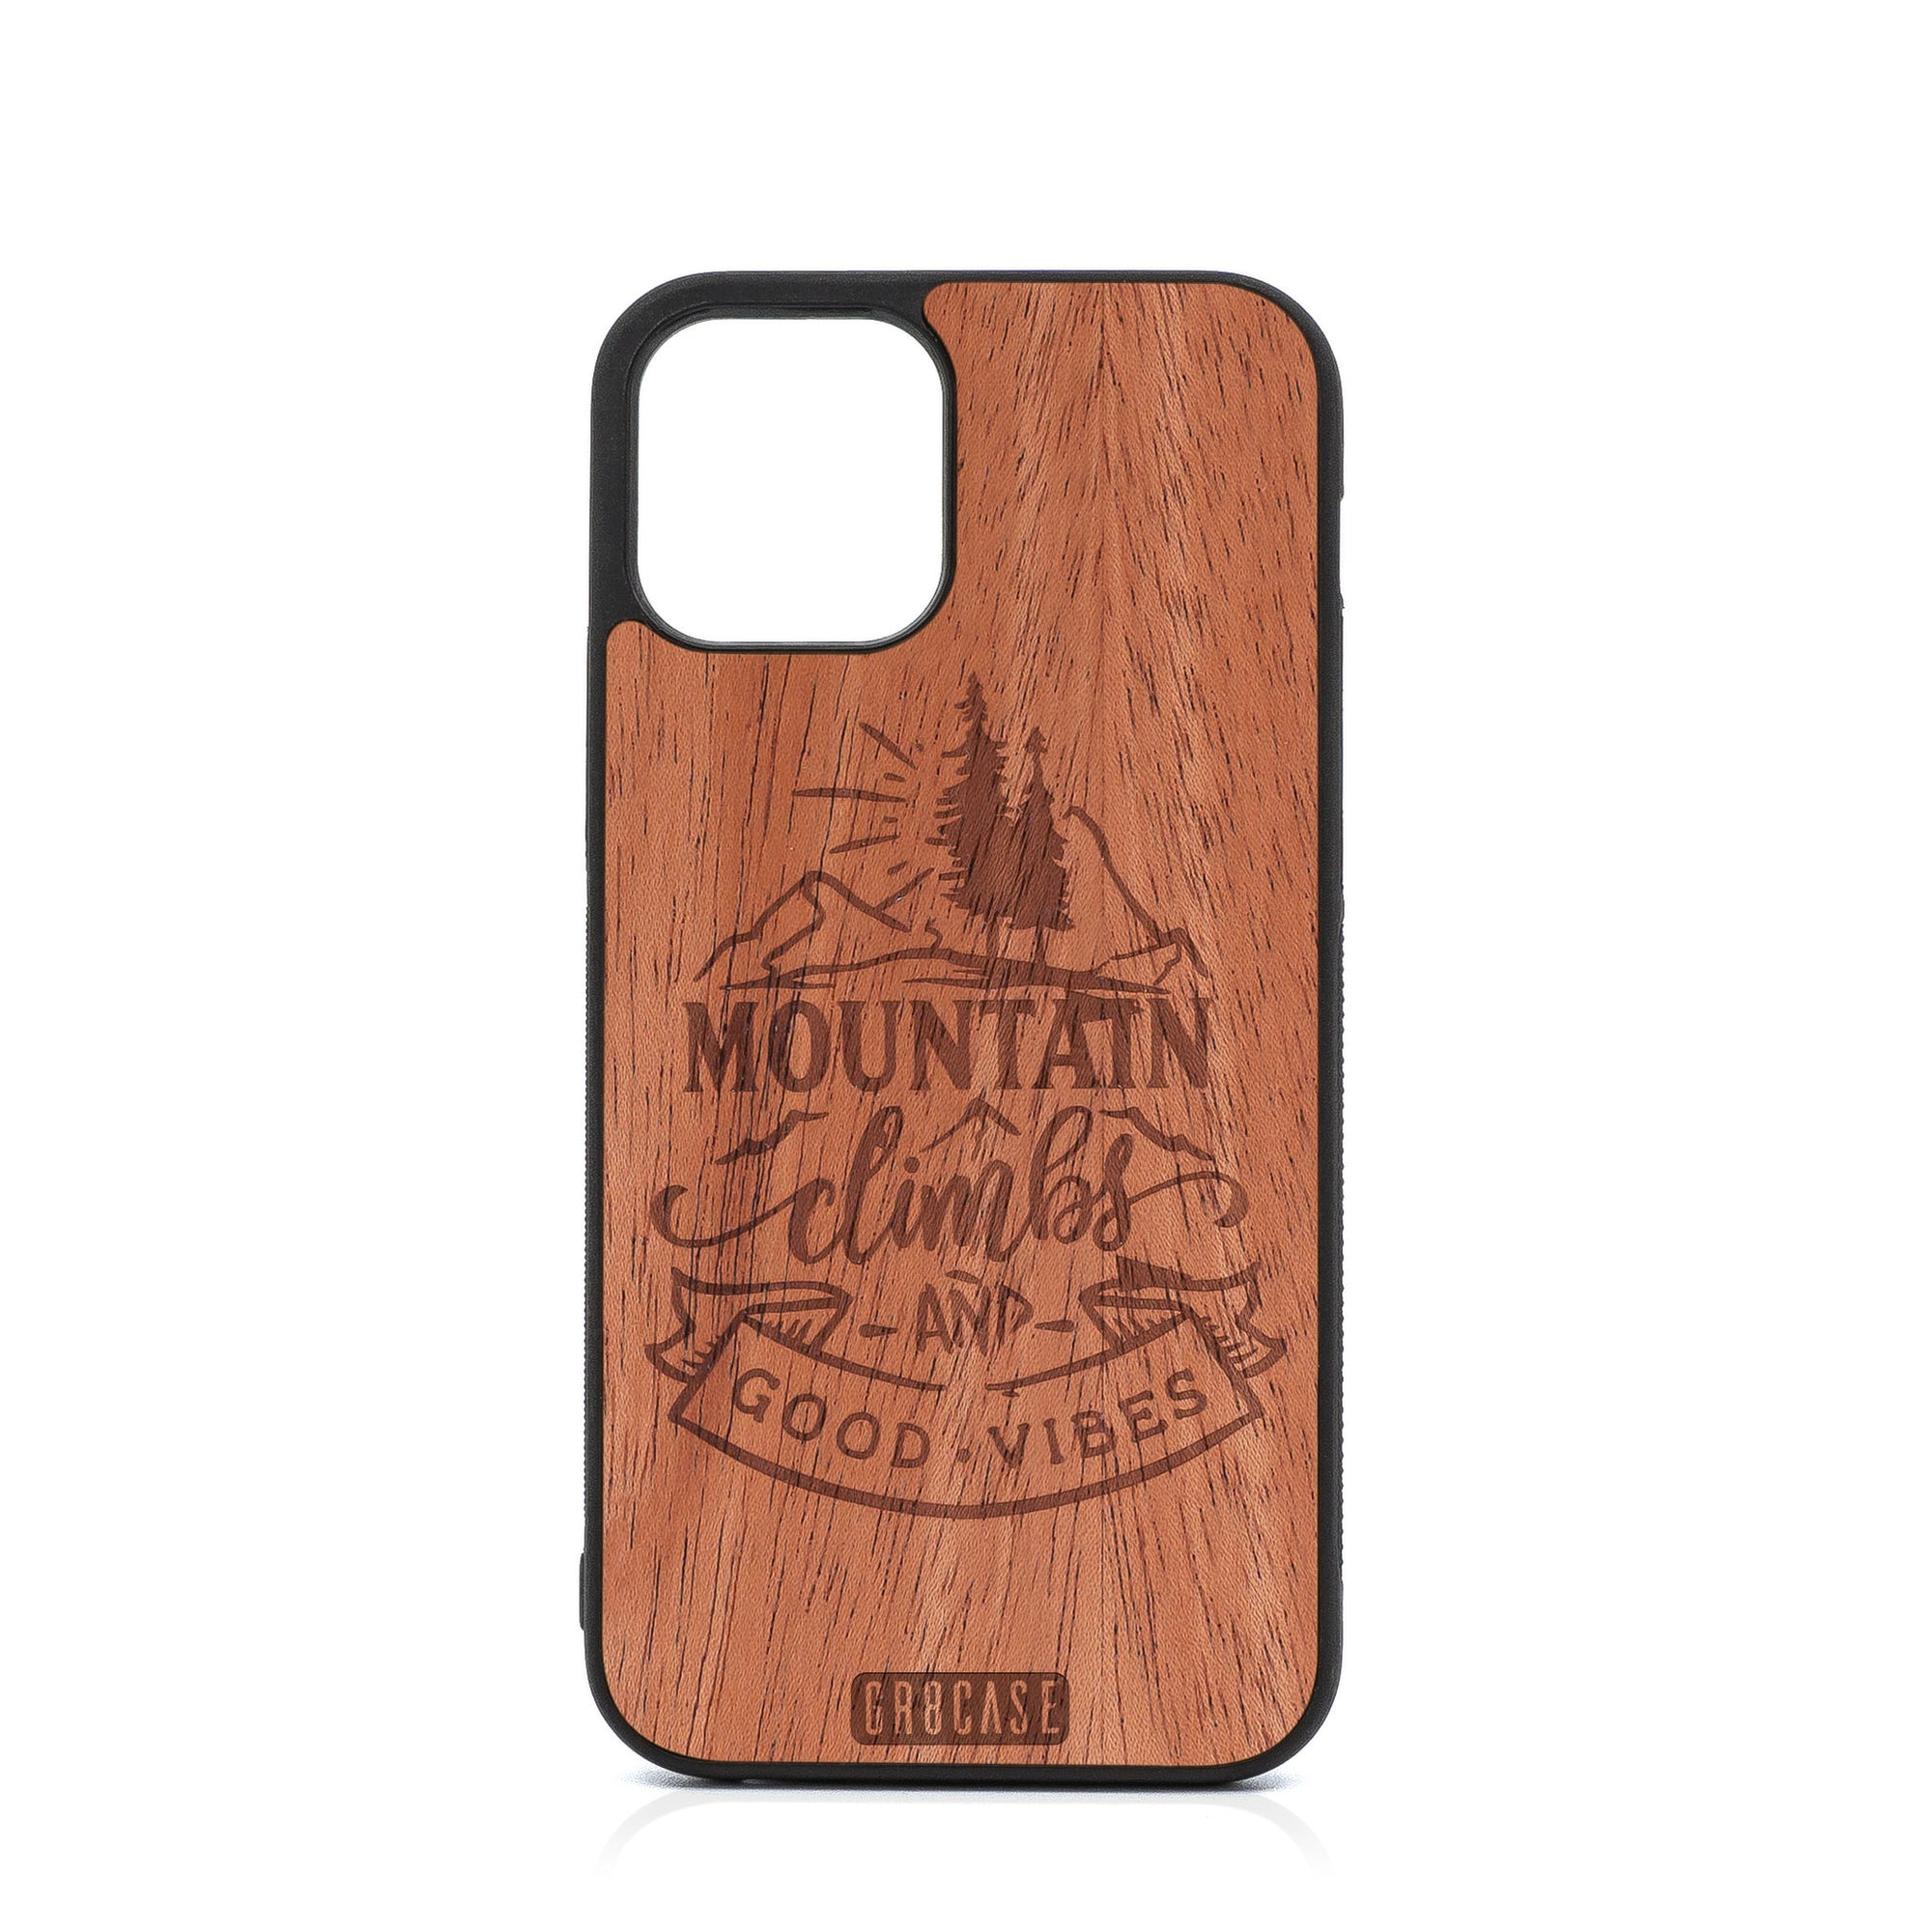 Mountain Climbs And Good Vibes Design Wood Case For iPhone 12 Pro